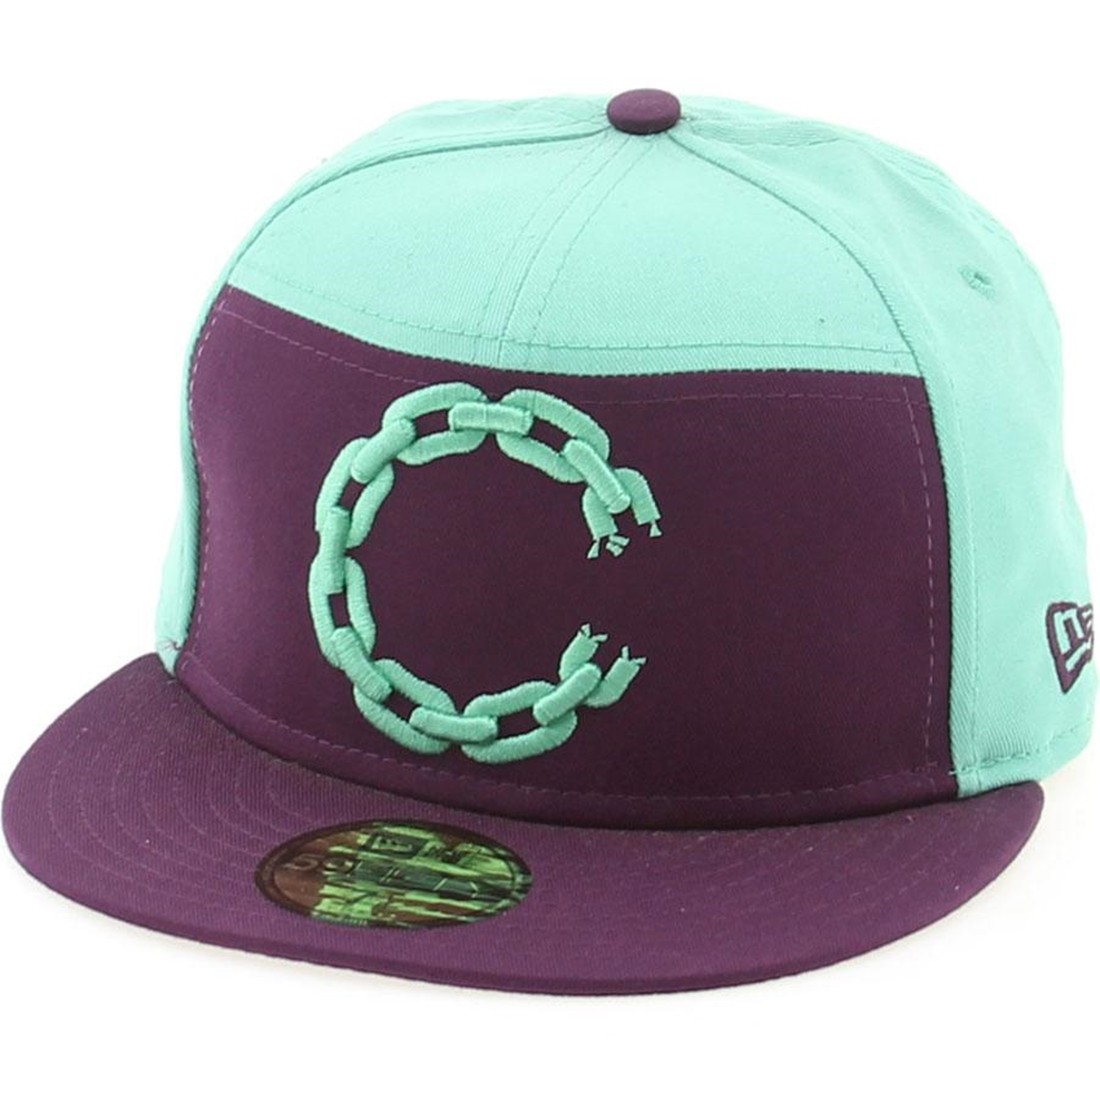 Crooks And Castles C Link Logo New Era Fitted Cap (teal / purple)